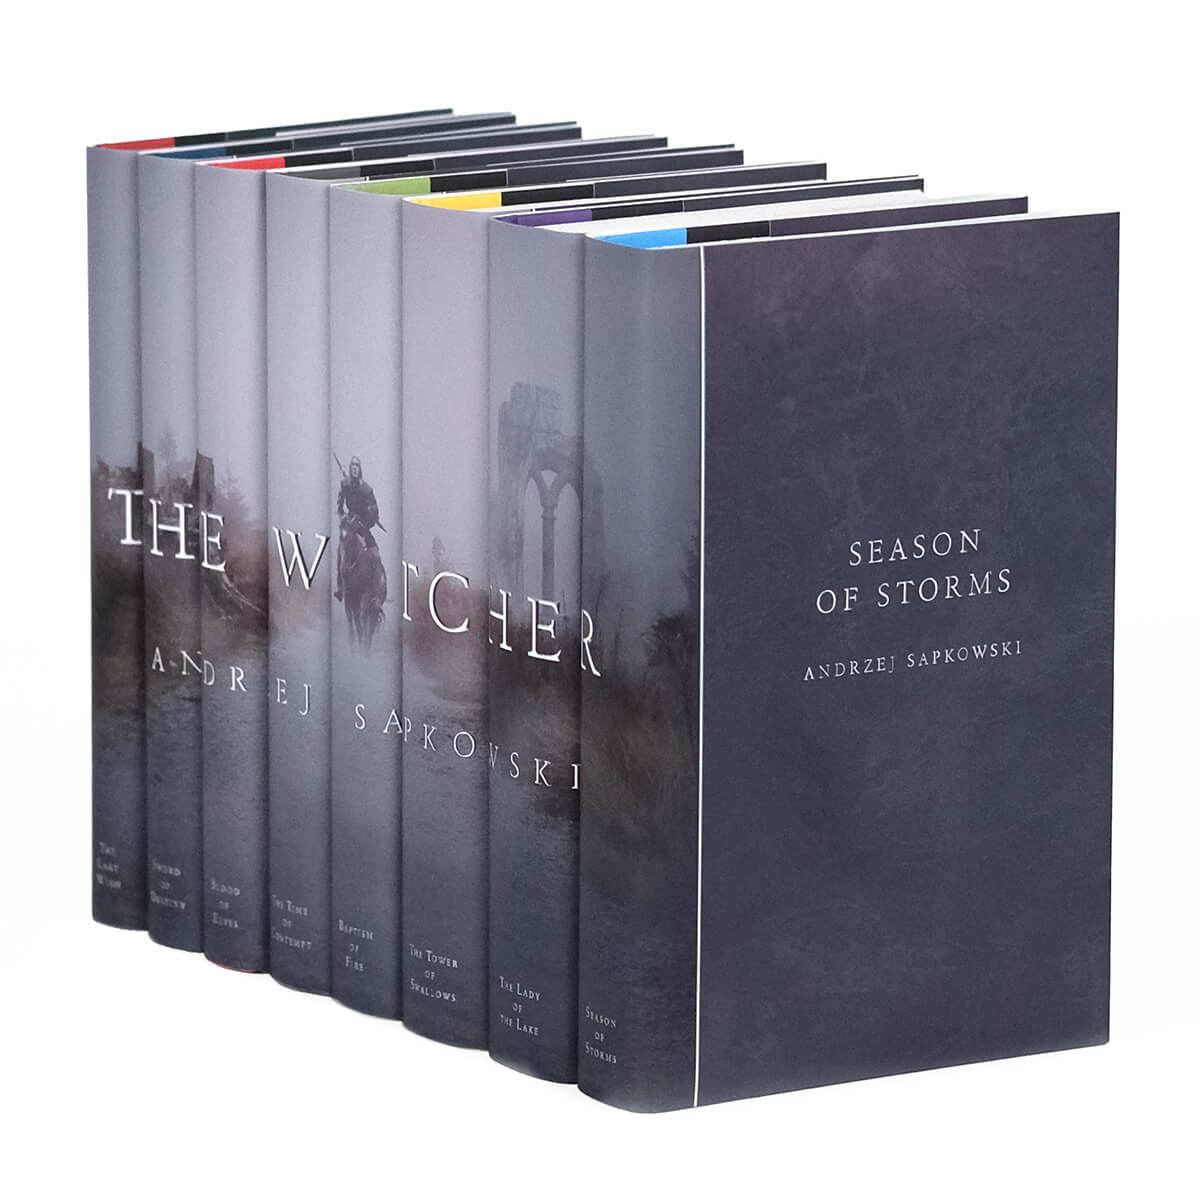 The Witcher custom collectible dust jackets from Juniper Custom featuring an image of a man on a horse walking on a path through the mist across the book spines. 